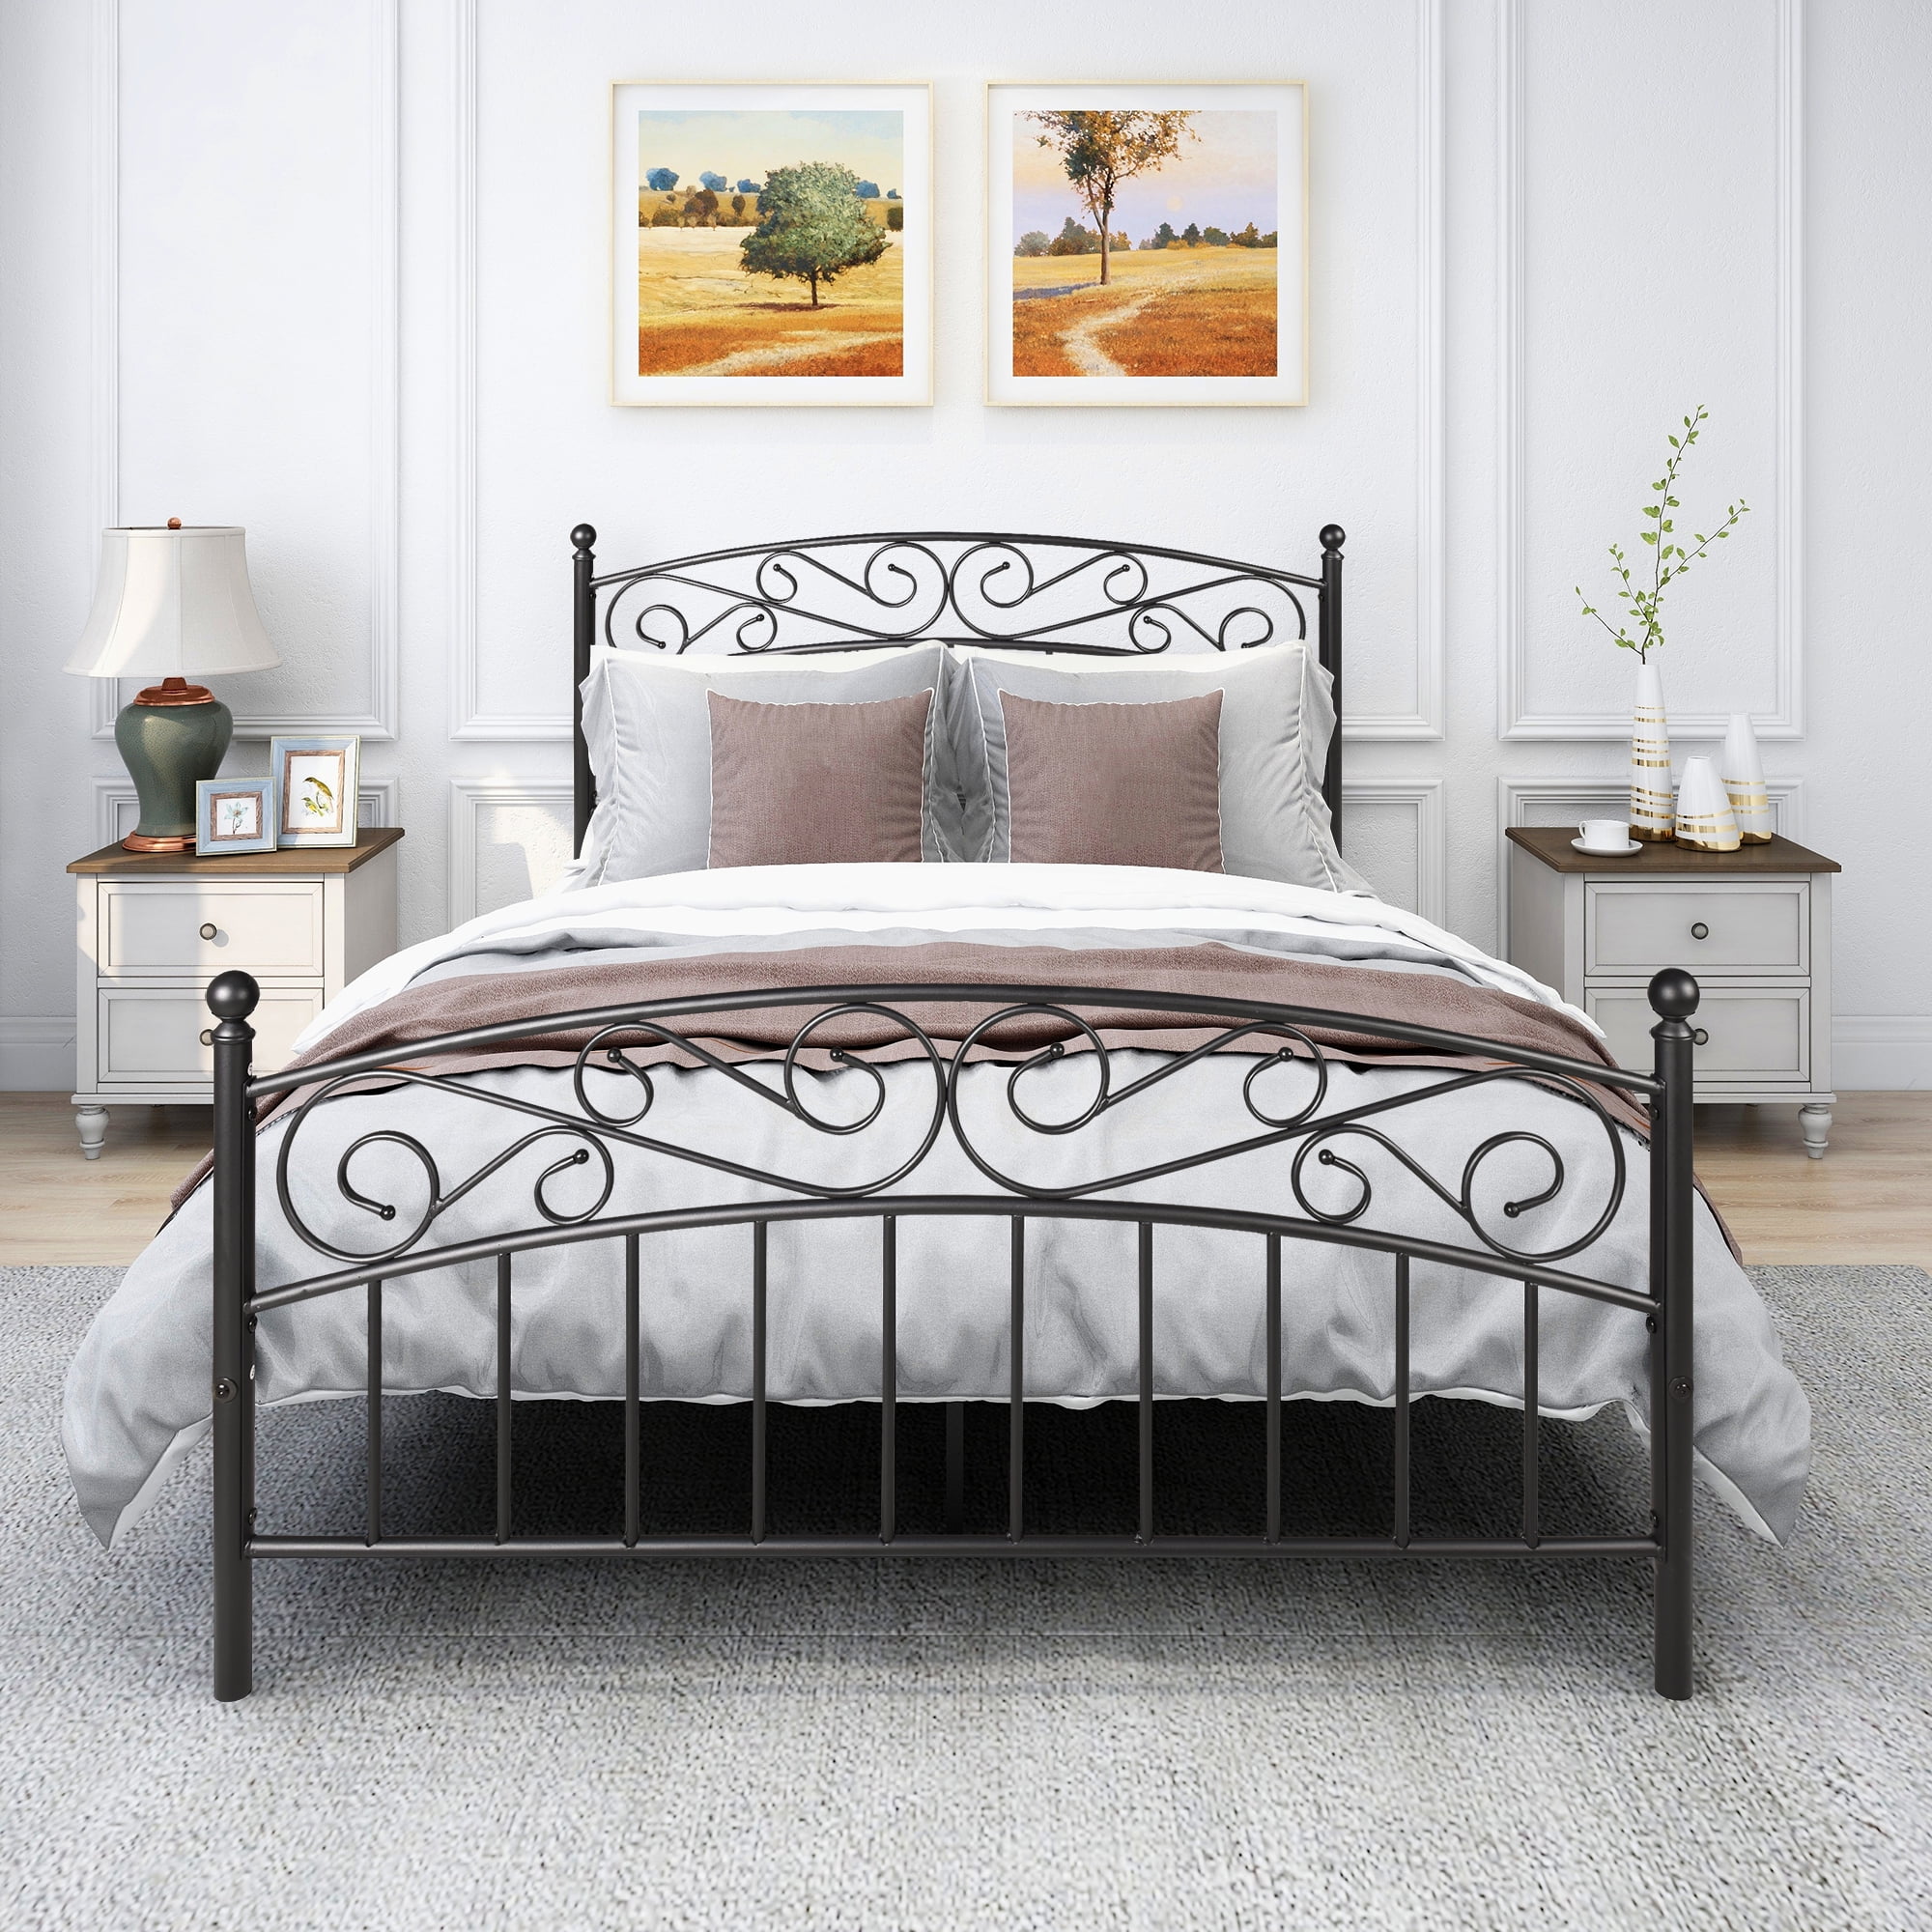 Metal Bed Frame Queen Size With Vintage, Black Wrought Iron Headboard Queen Bed